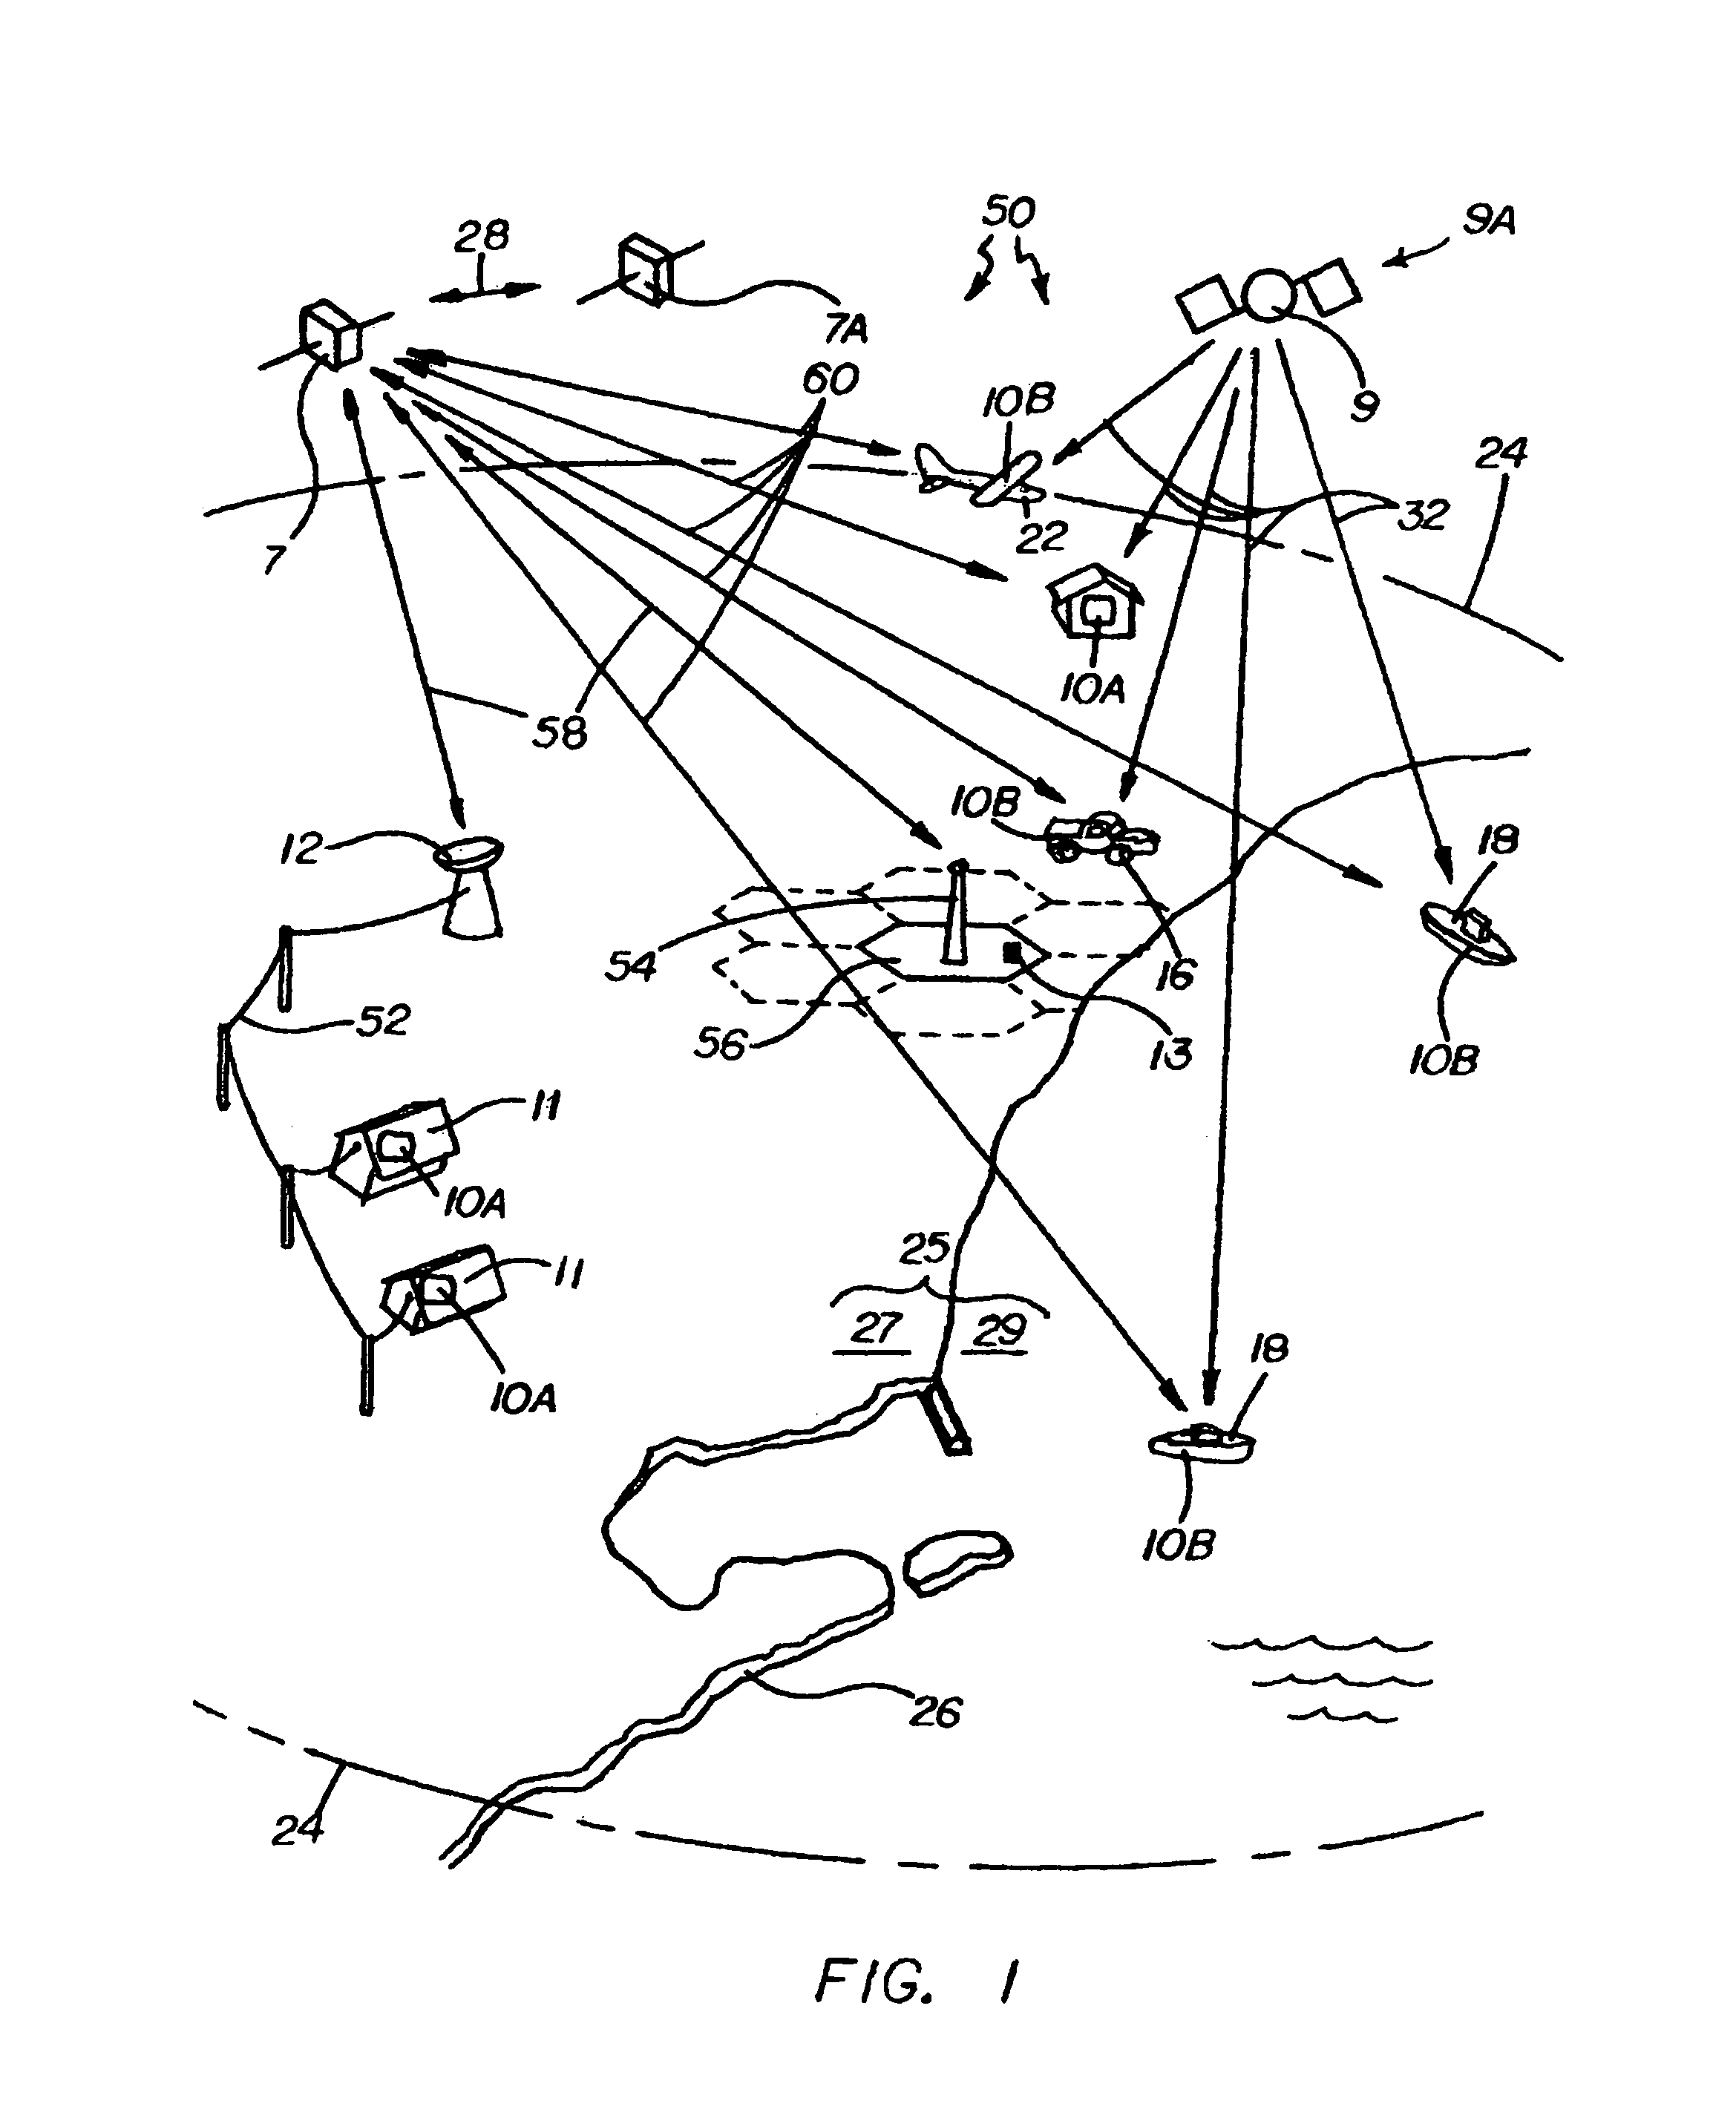 Location based communications system